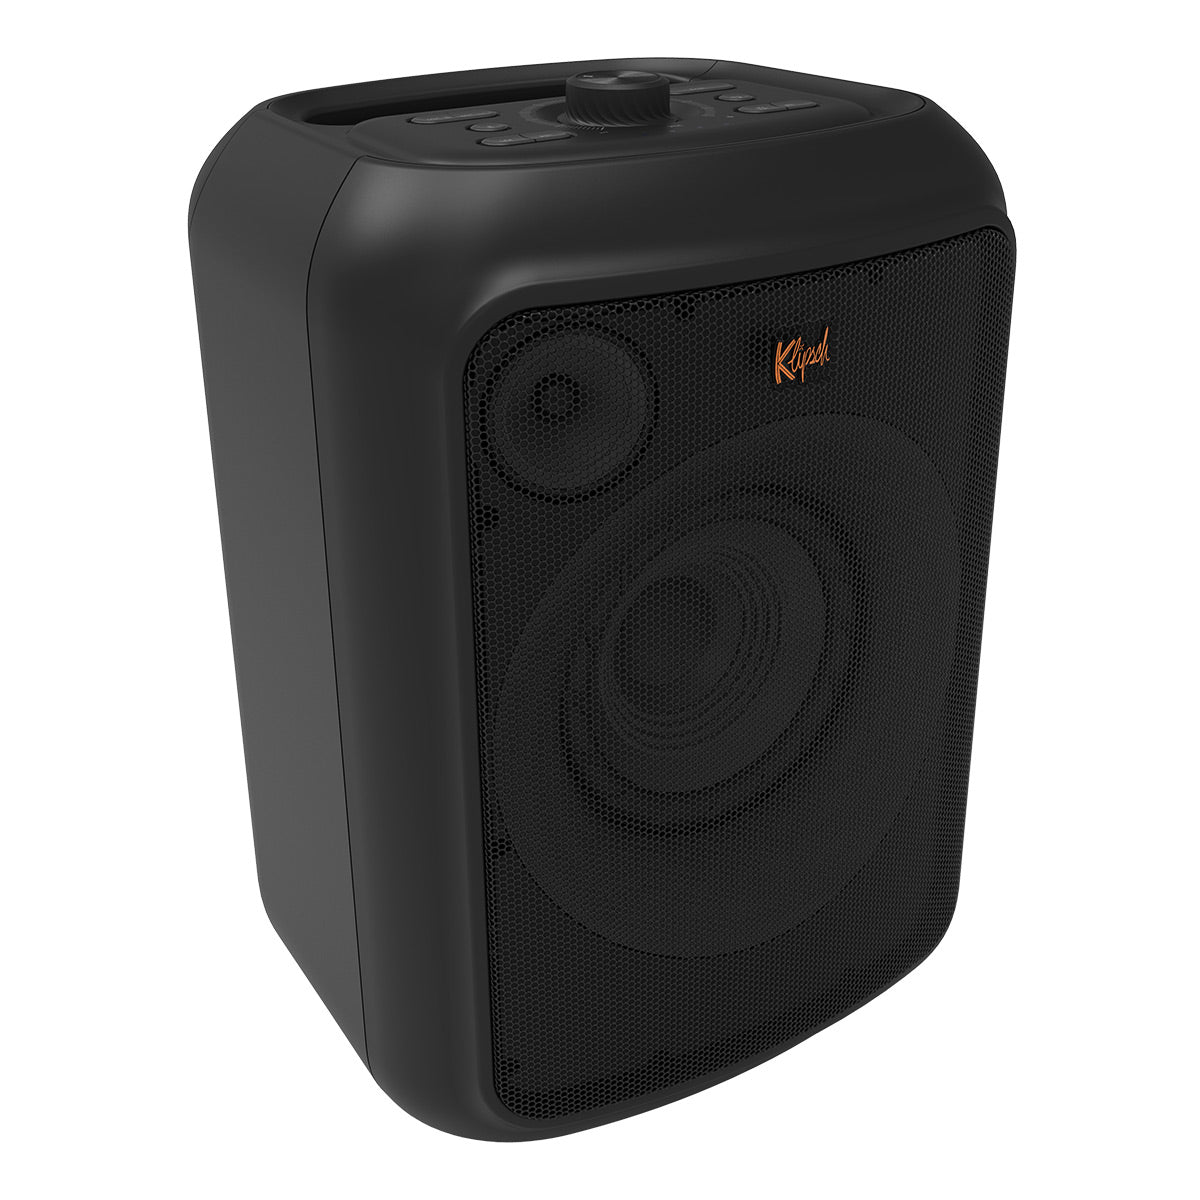 Klipsch GIG XL Bluetooth Wireless Party Speaker with Wired Microphone, RGB Lighting, 8 Hour Battery Life & IPX4 Splash Resistance